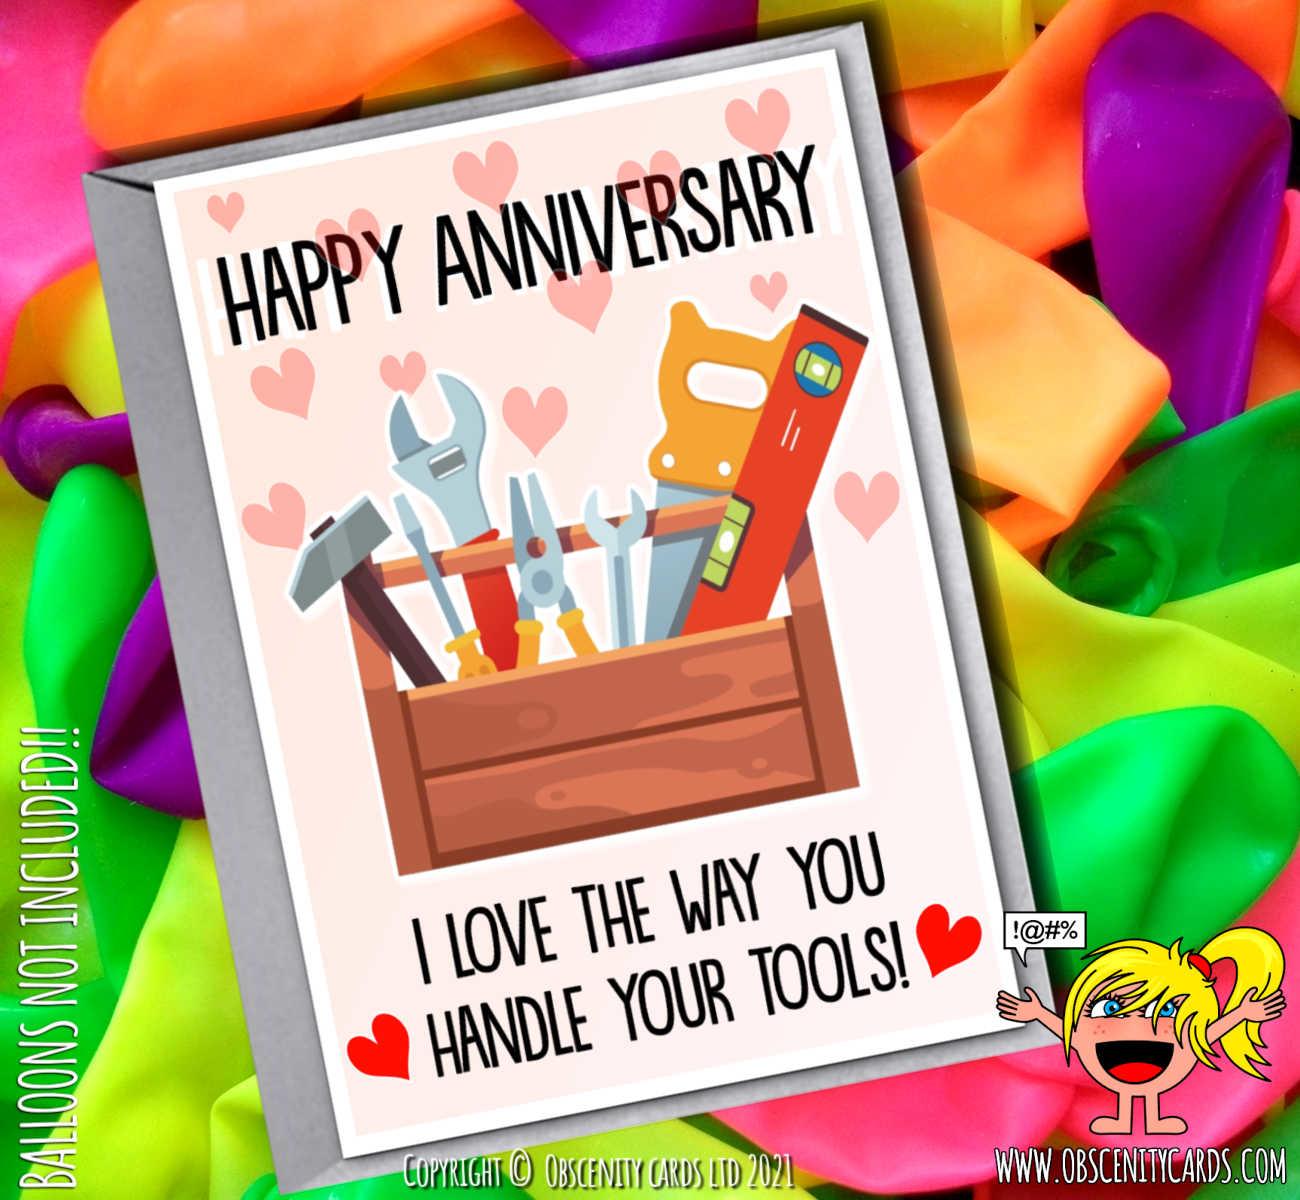 I LOVE THE WAY YOU HANDLE YOUR TOOLS ANNIVERSARY CARD